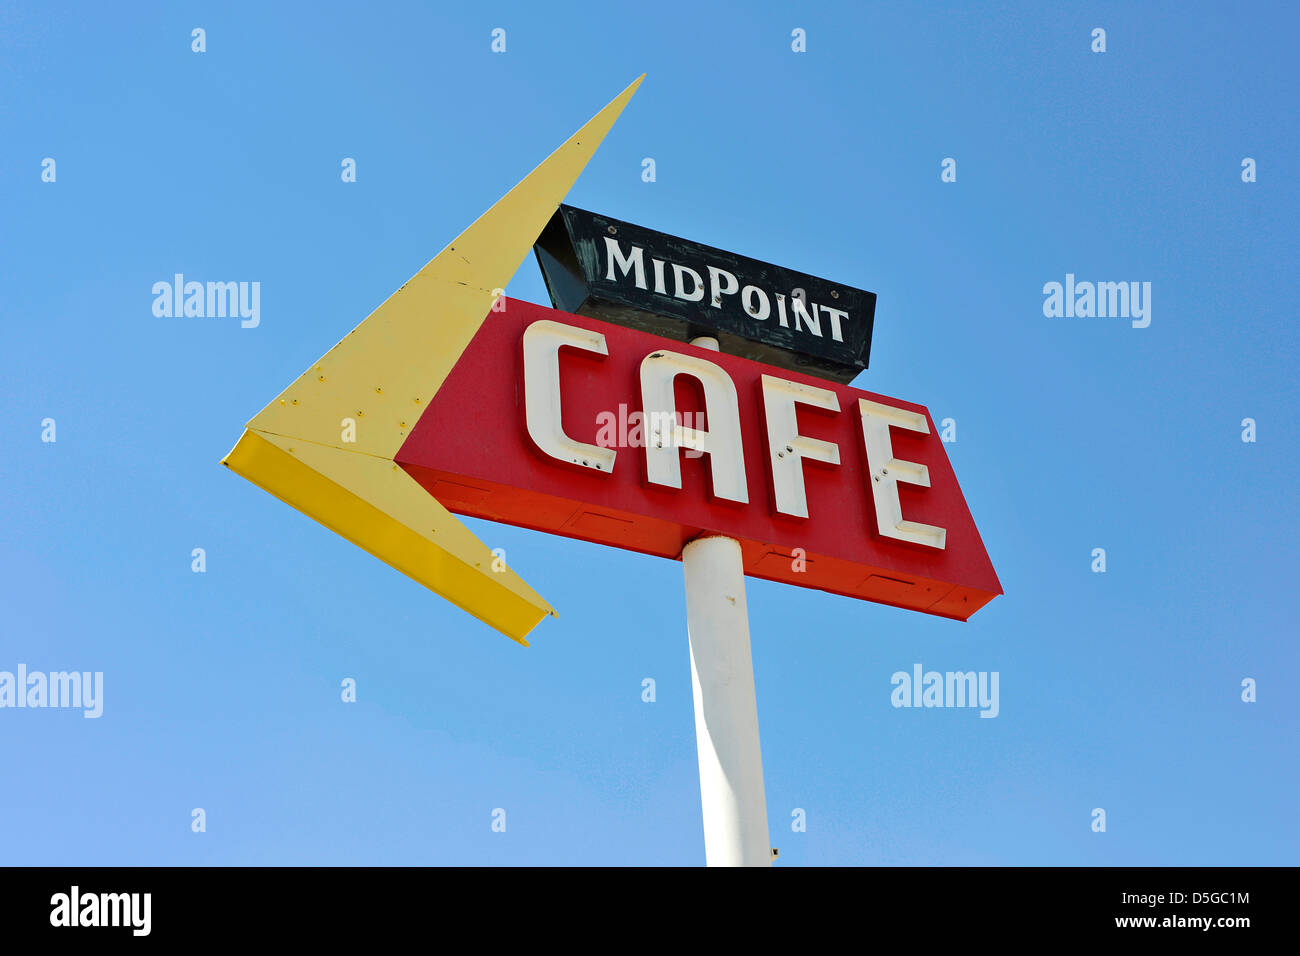 Midpoint Cafe sign, Route 66, Adrian, Texas Stock Photo